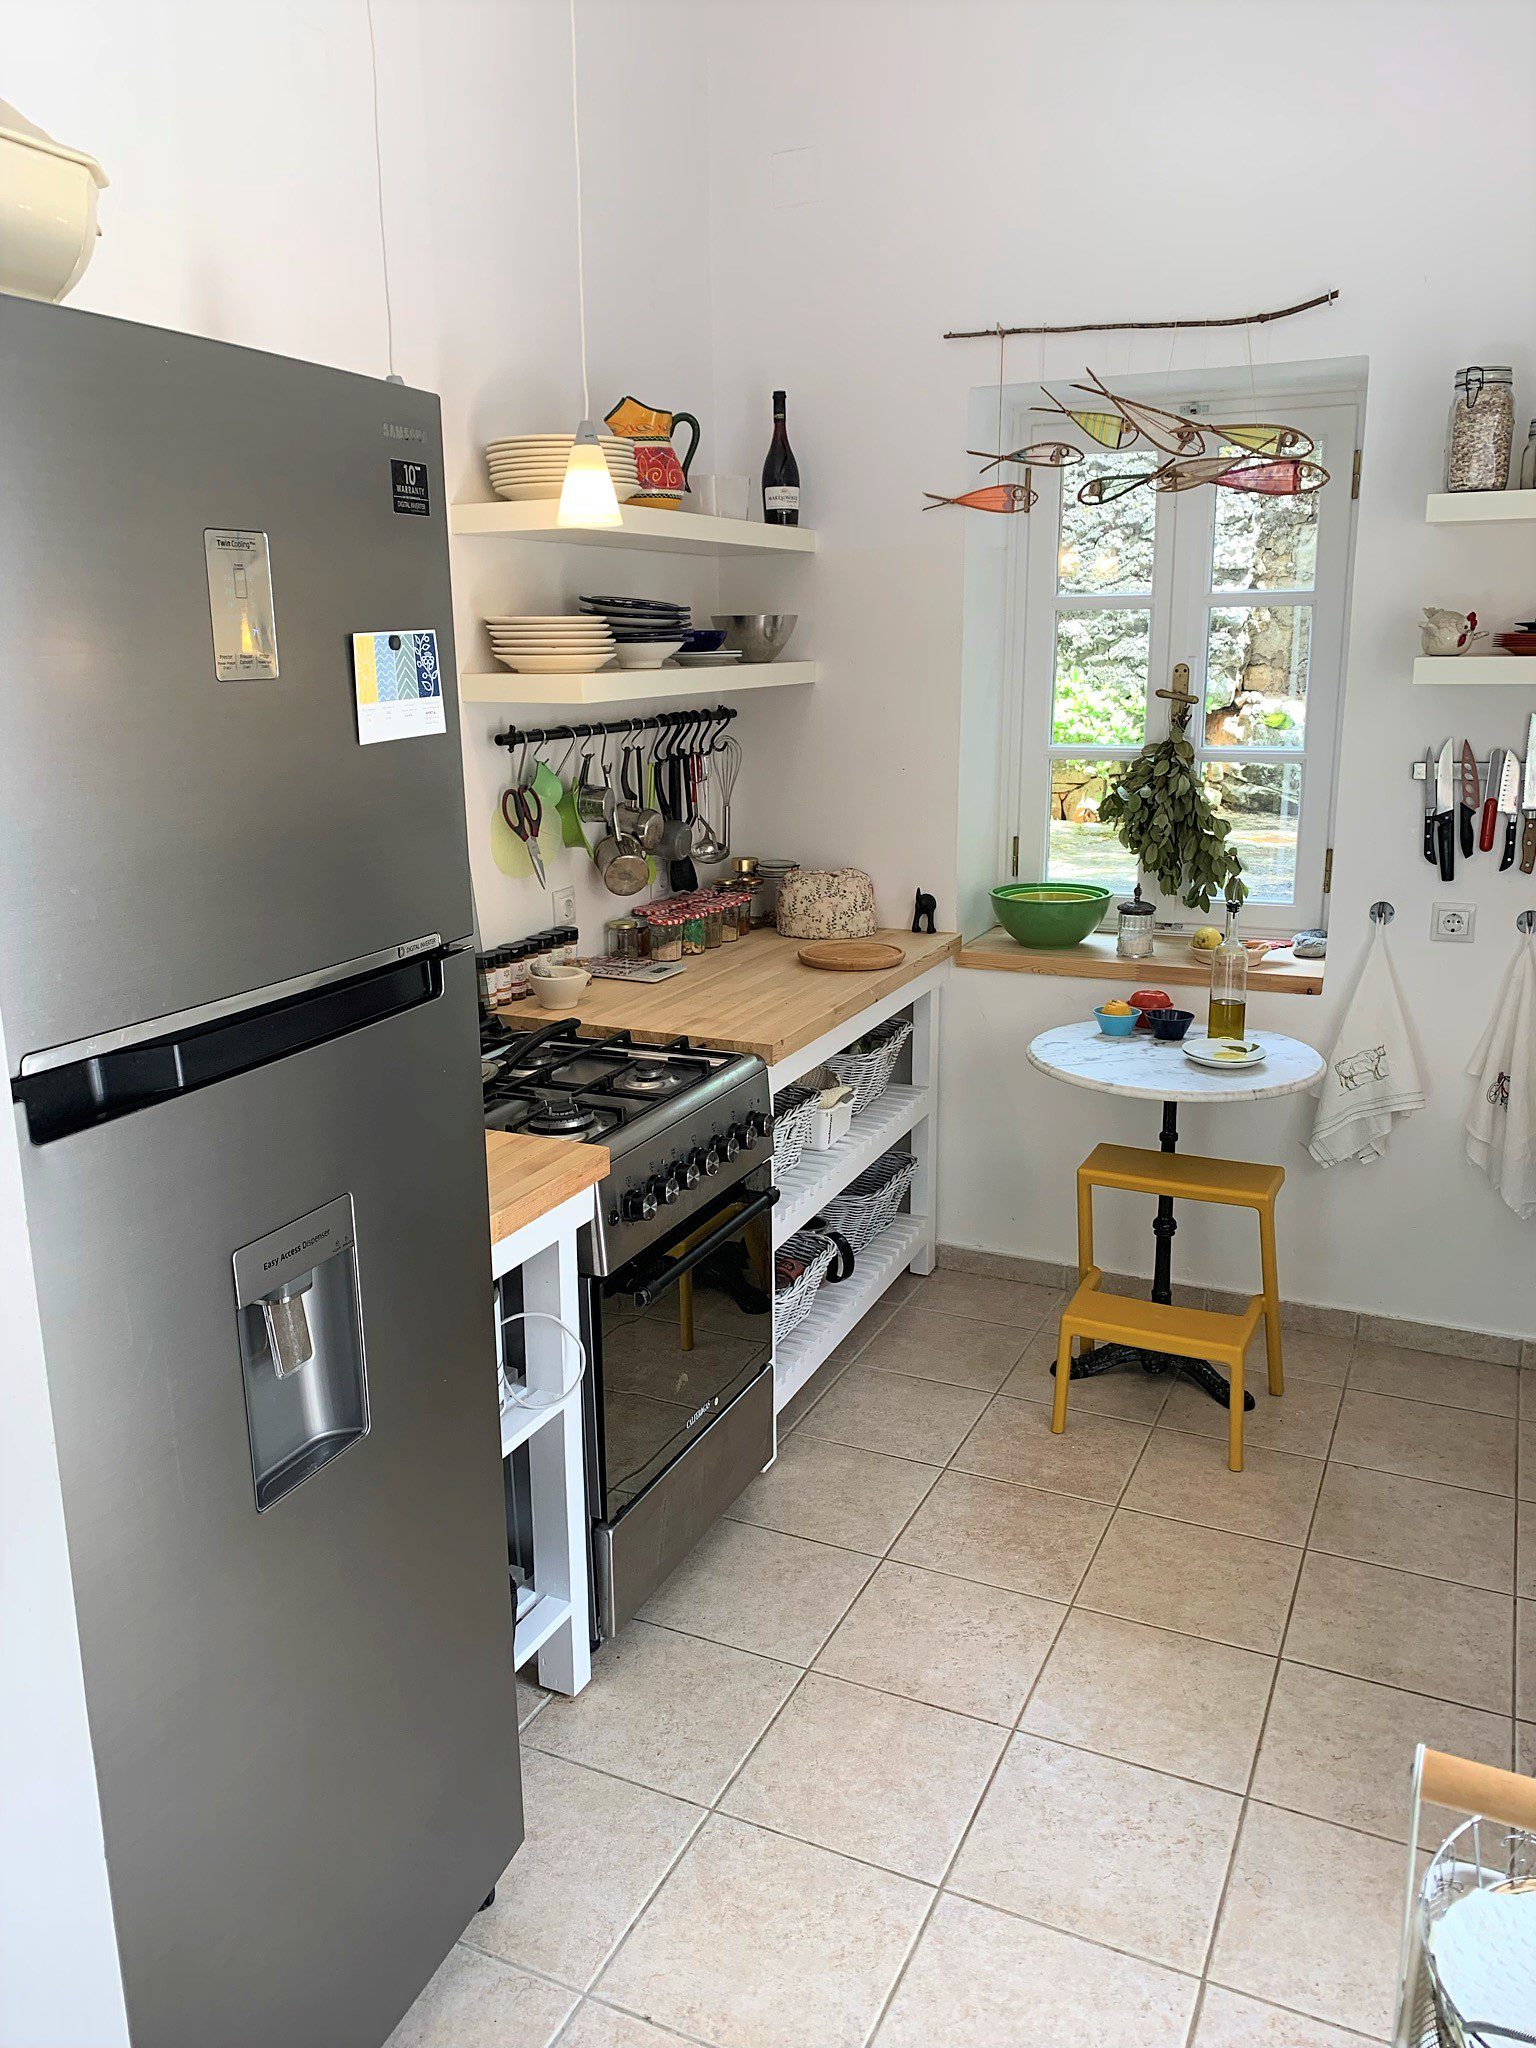 Kitchen of house for sale in Ithaca Greece, Vathi